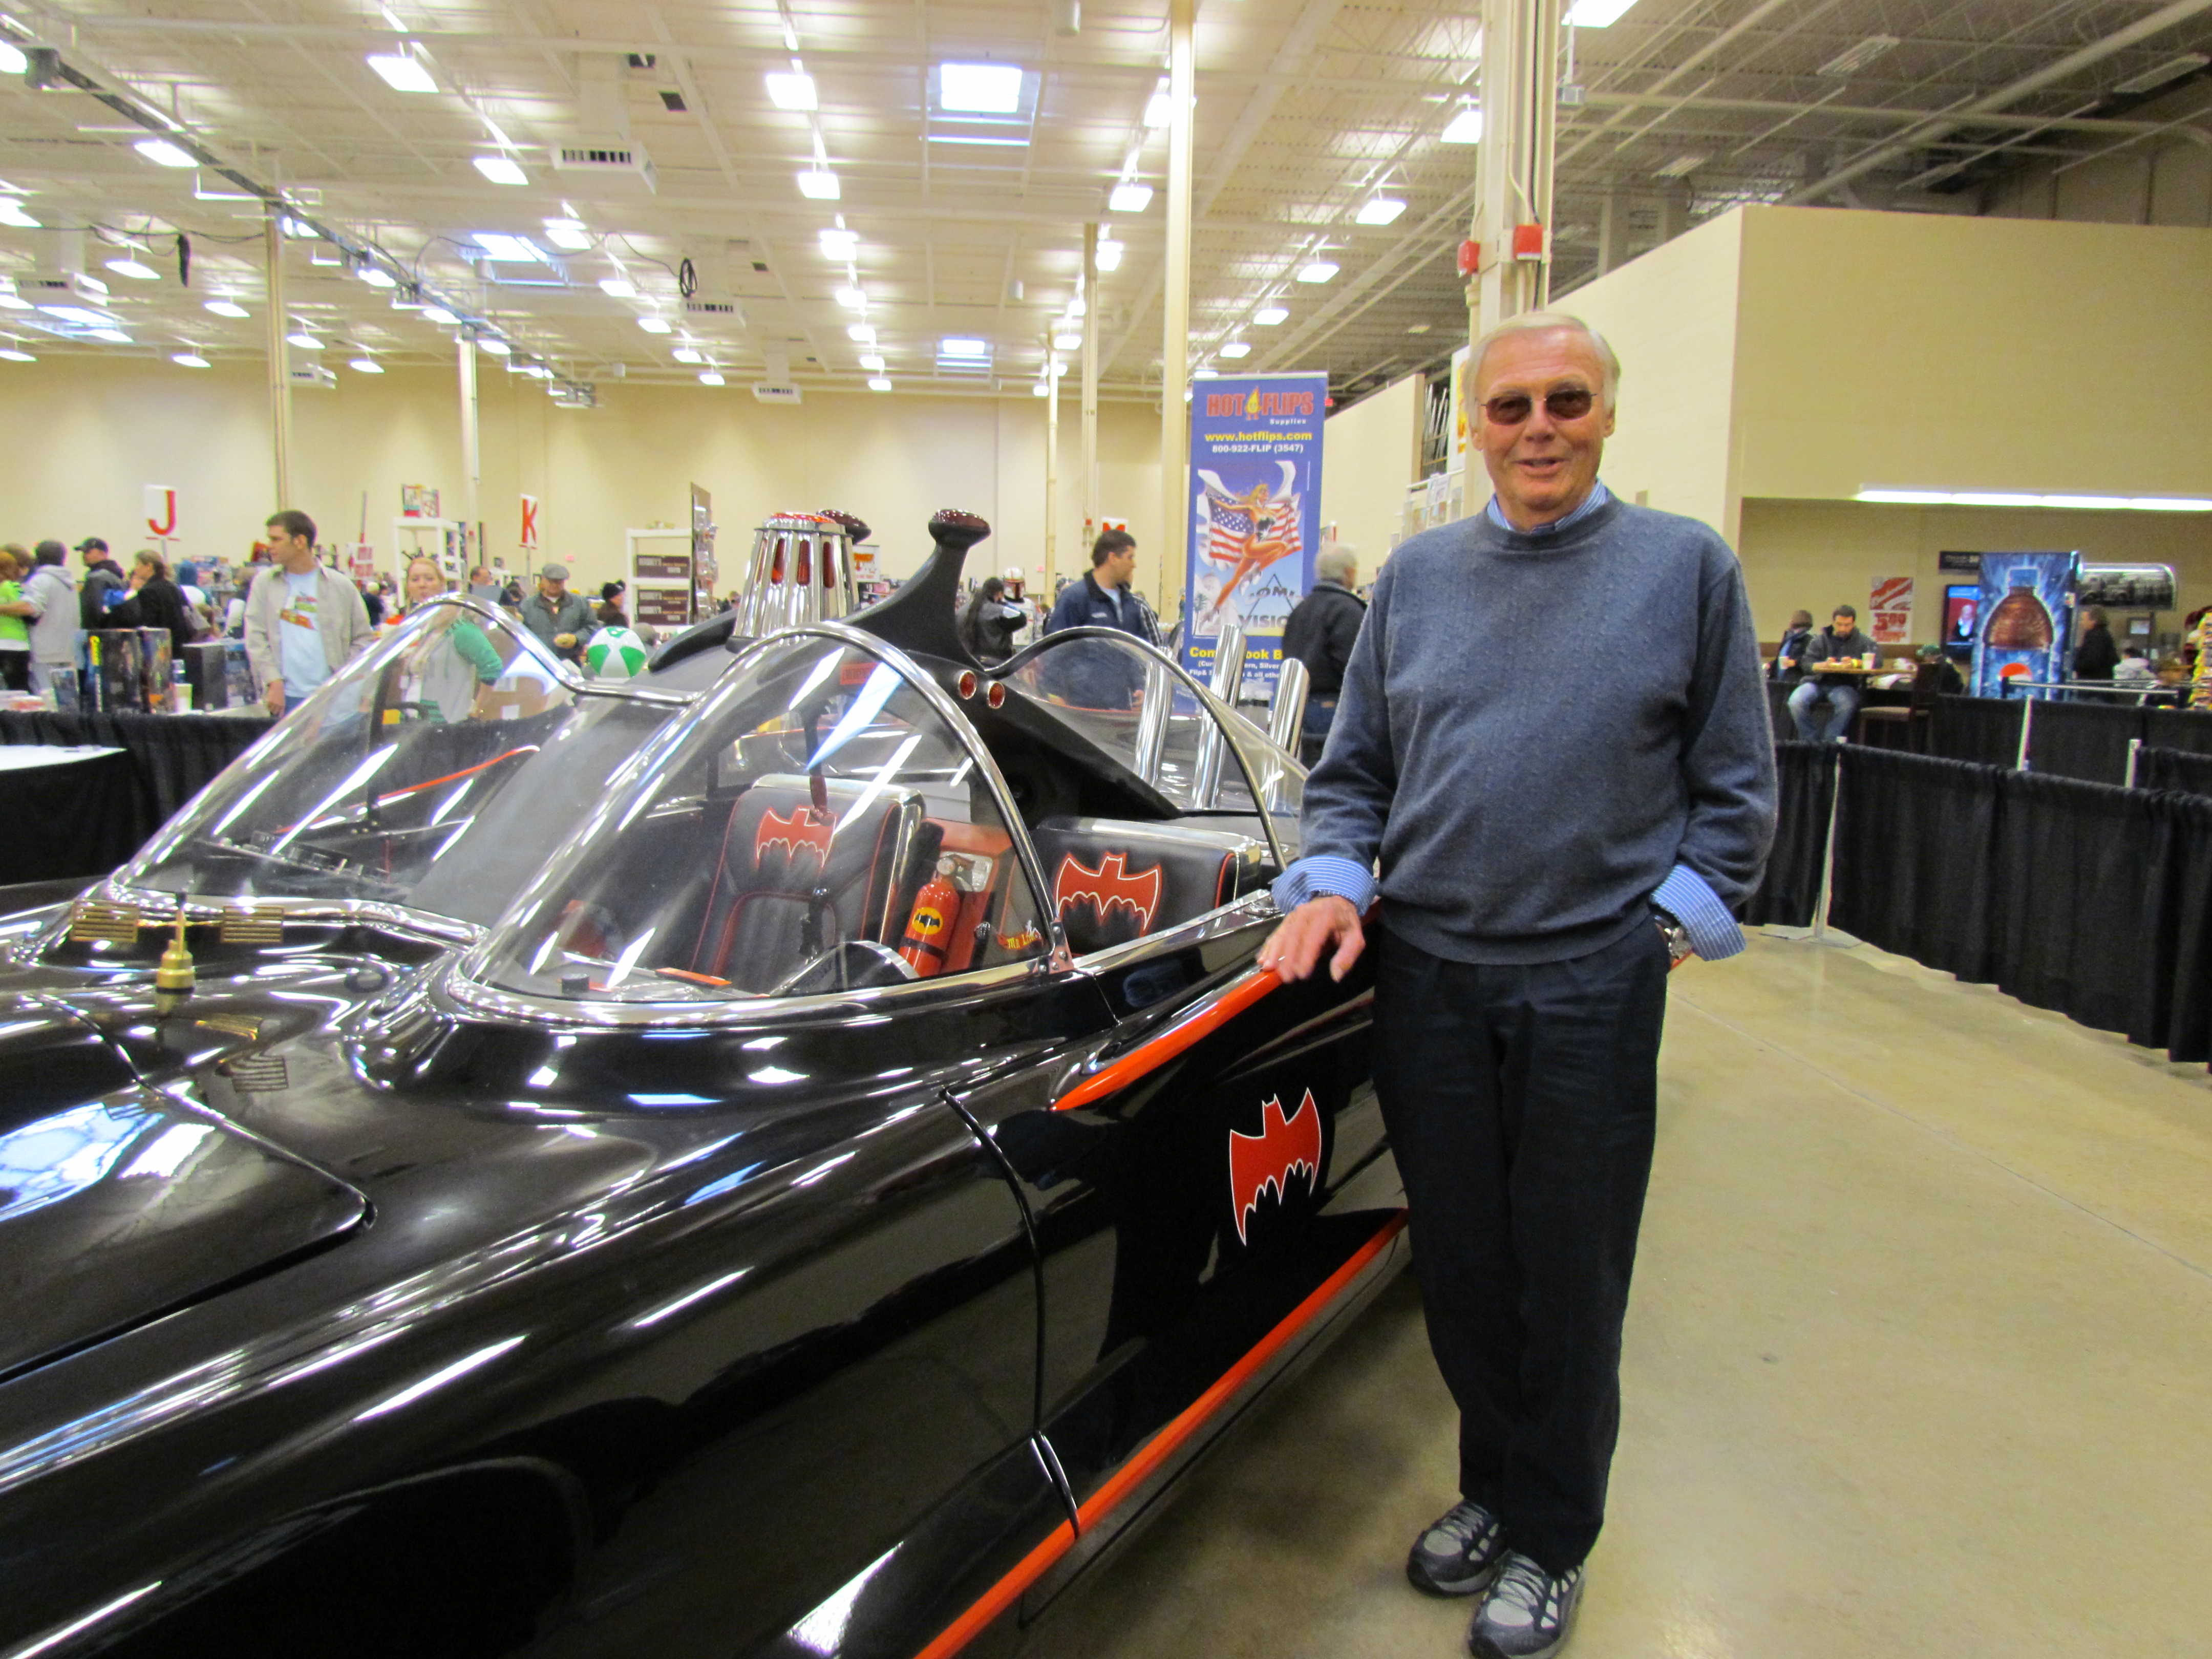 Our hero with the Batmobile.